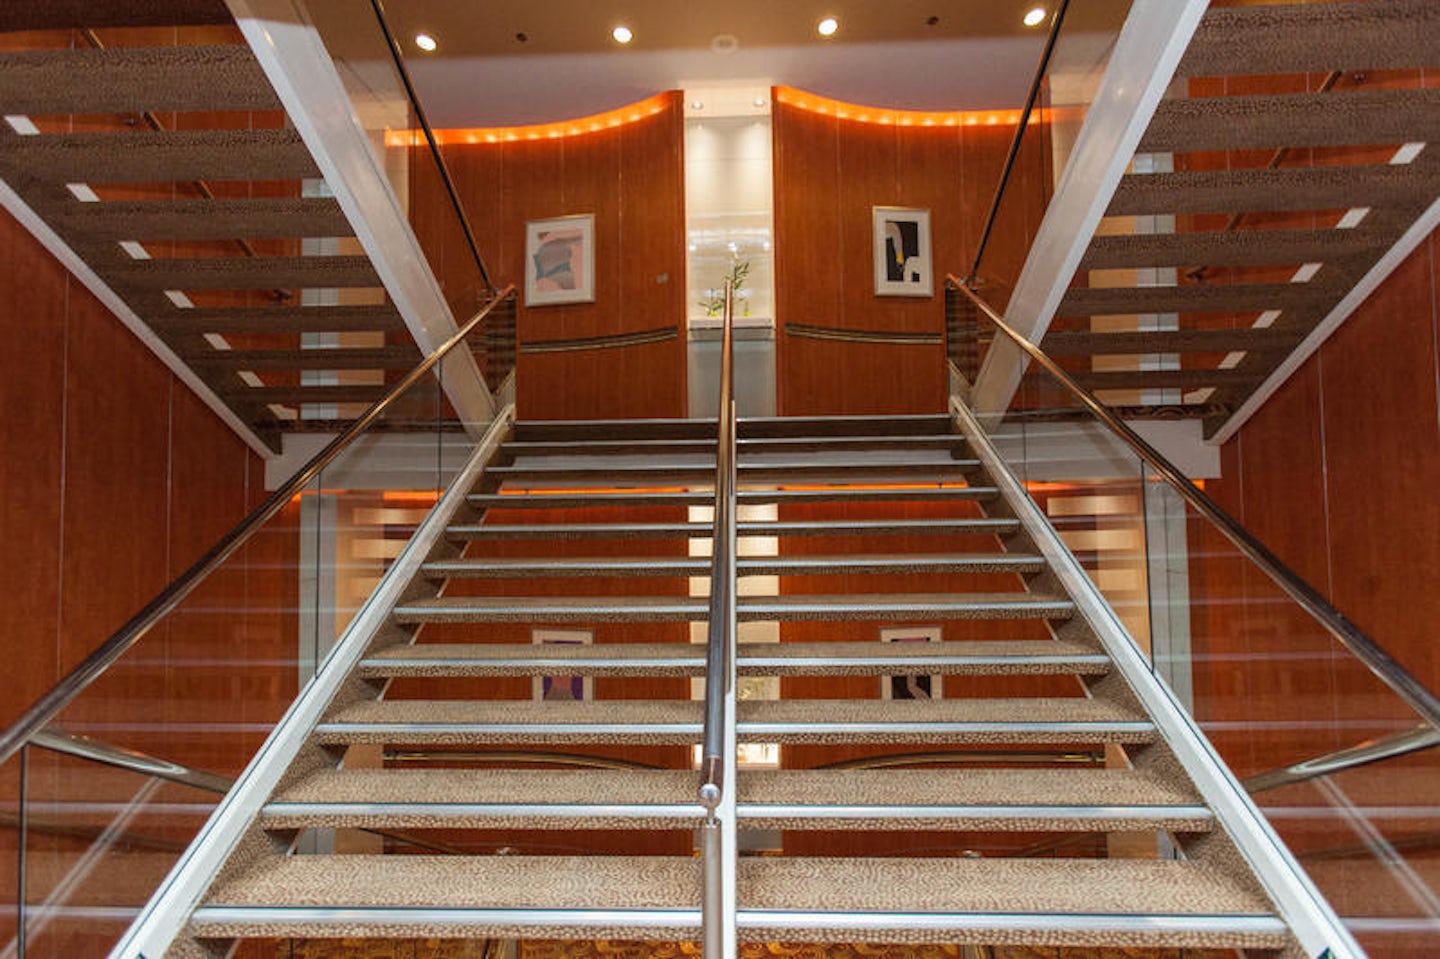 Stairs on Celebrity Constellation